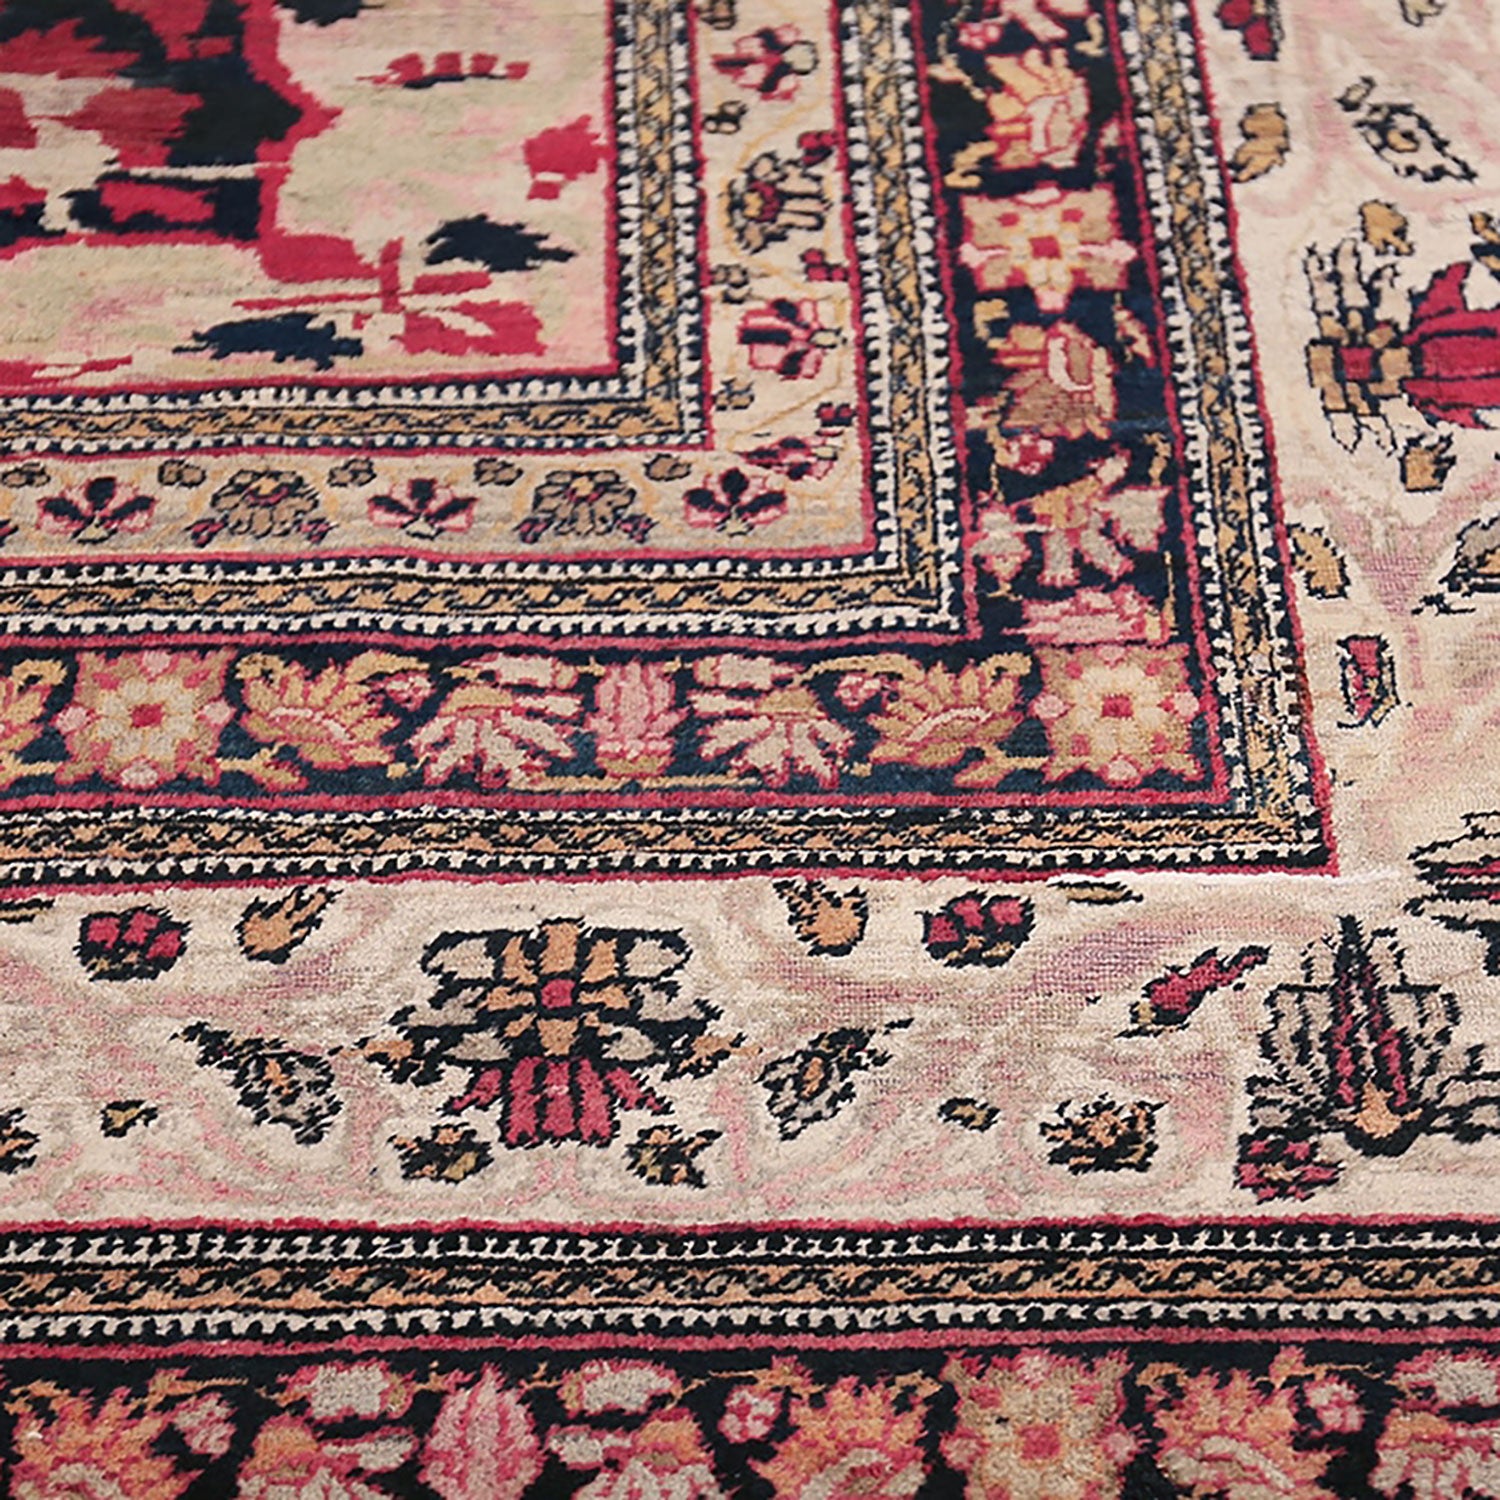 Exquisite handmade rug with intricate floral and geometric motifs